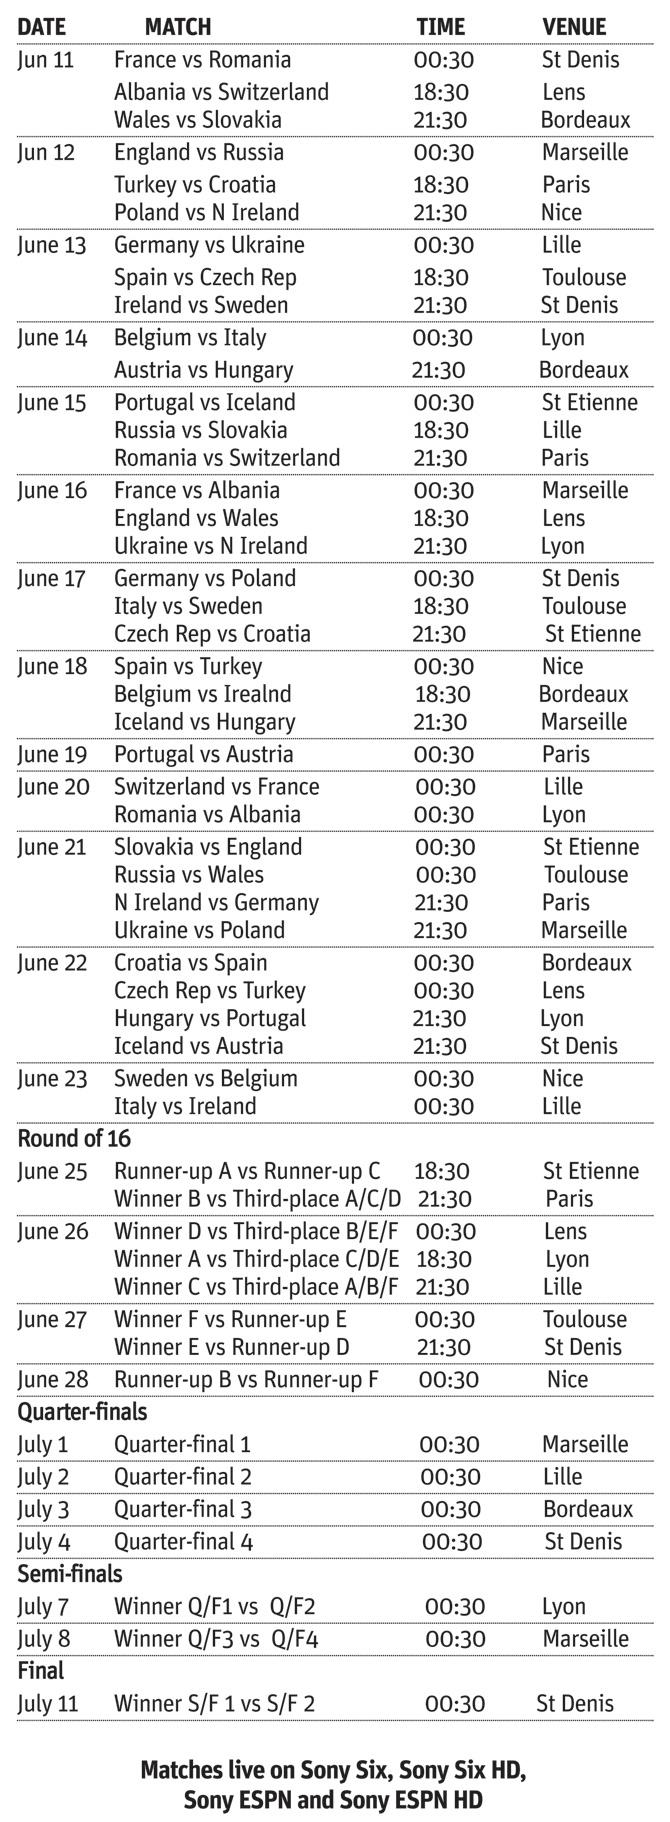 Euro 2016 schedule of the Euro 2016 fixtures, Euro 2016 timings, Euro 2016 venues and the Euro 2016 Groups